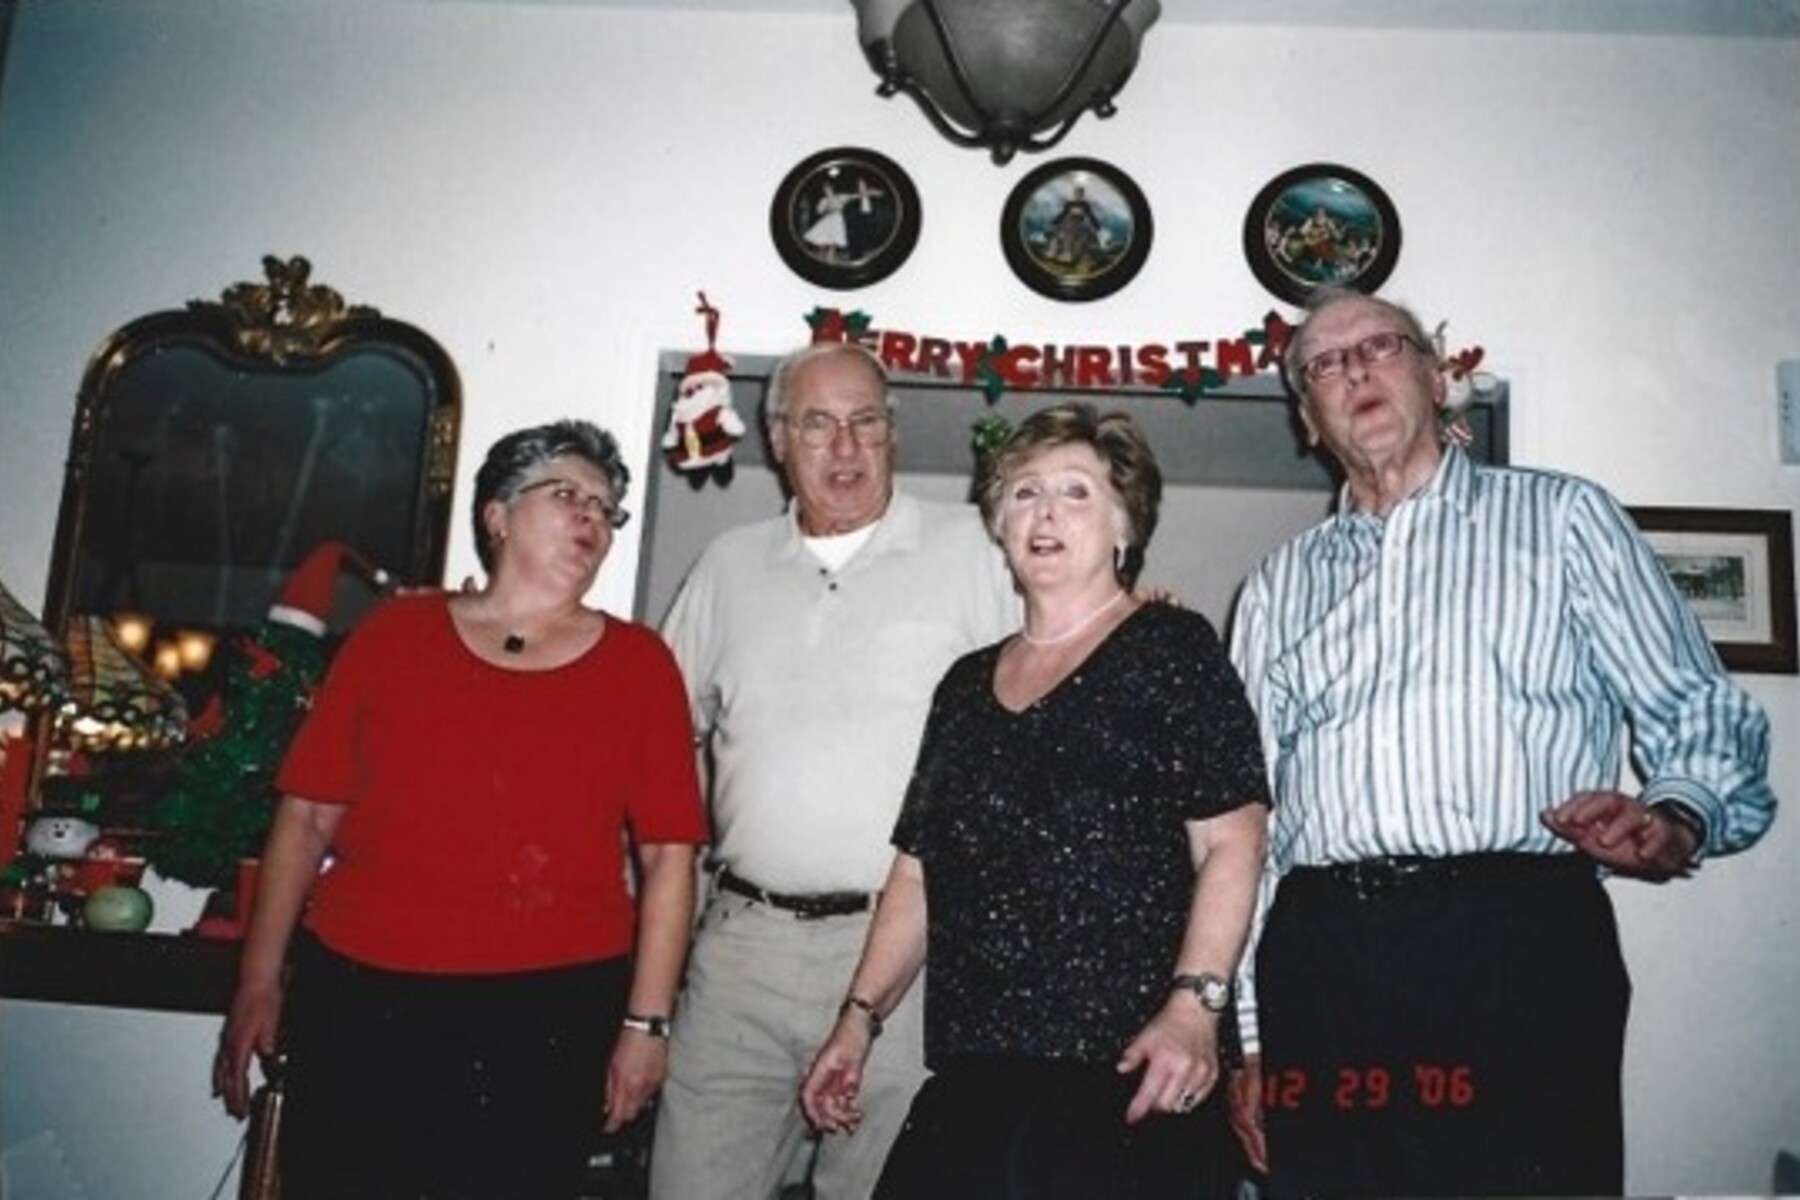 From left to right: Gail Shields, Tenor; Rick Snoulten, Bass; Gaille Snoulten; Lead or Melody and George Shields, Baritone